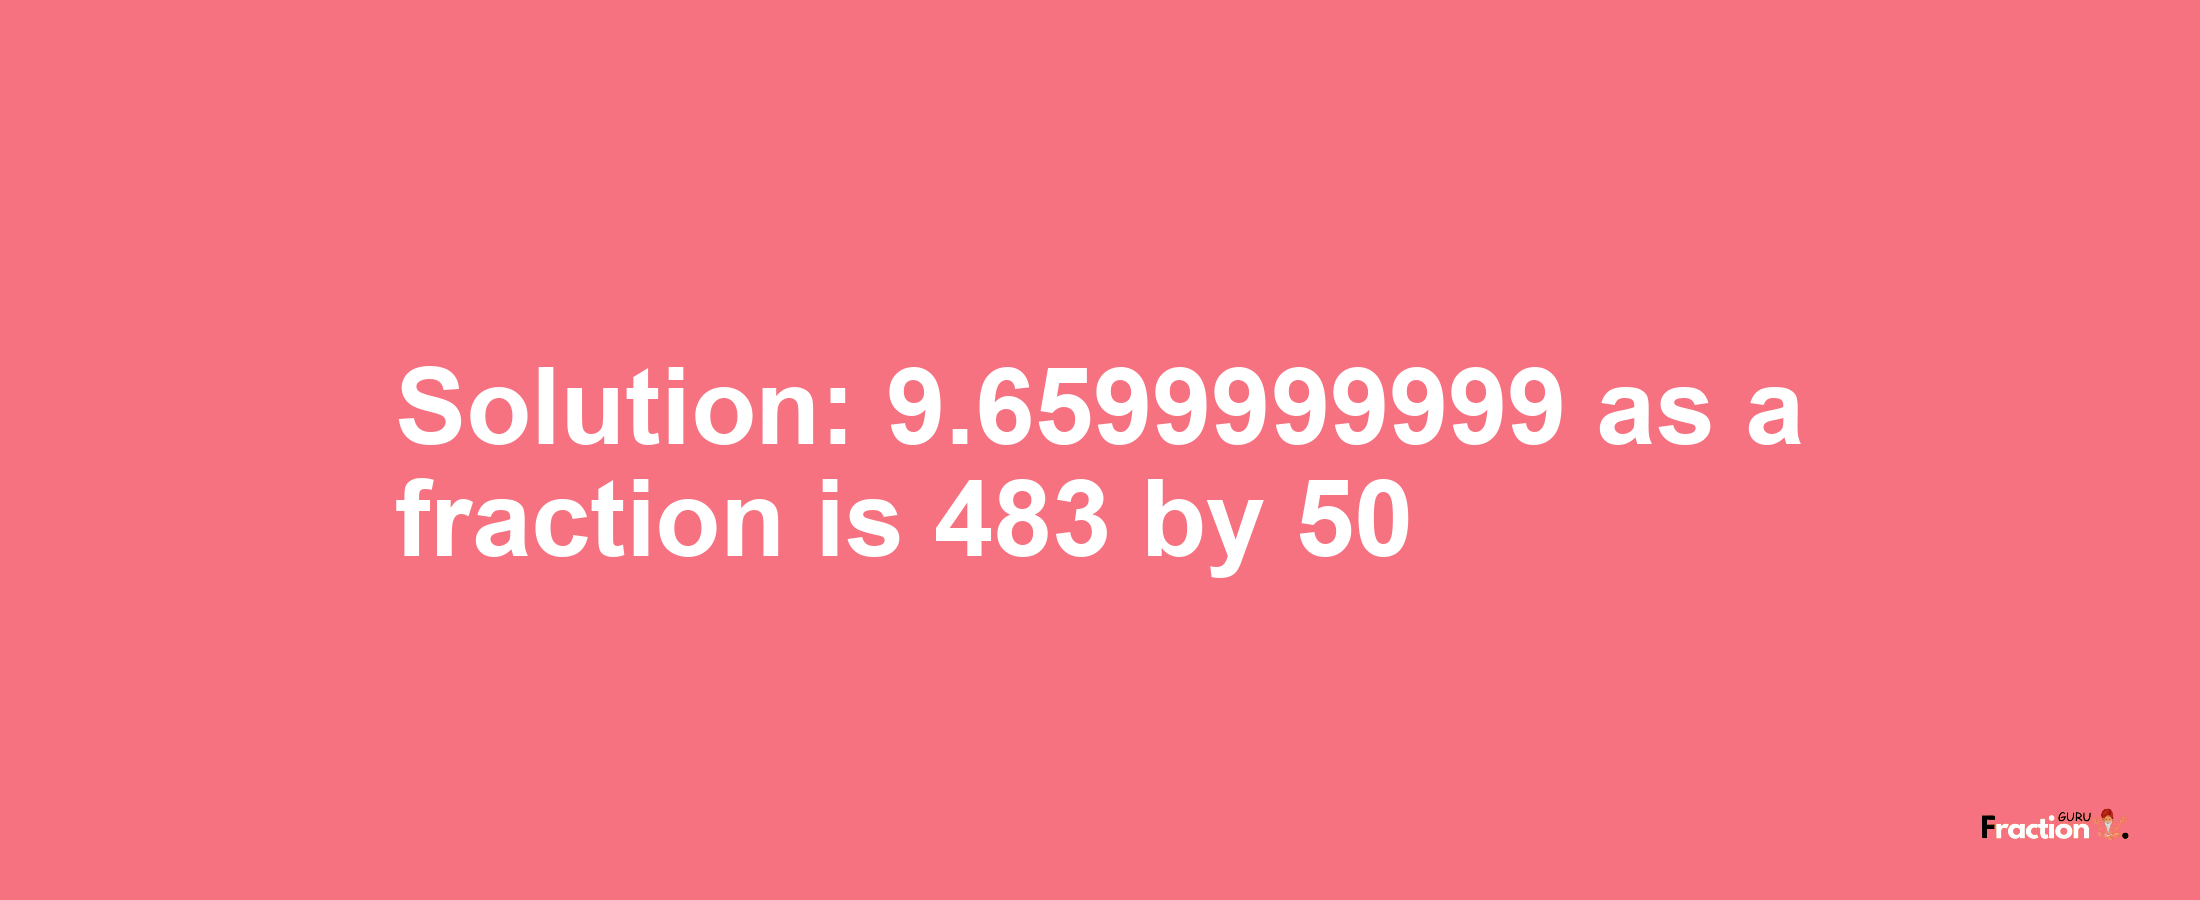 Solution:9.6599999999 as a fraction is 483/50